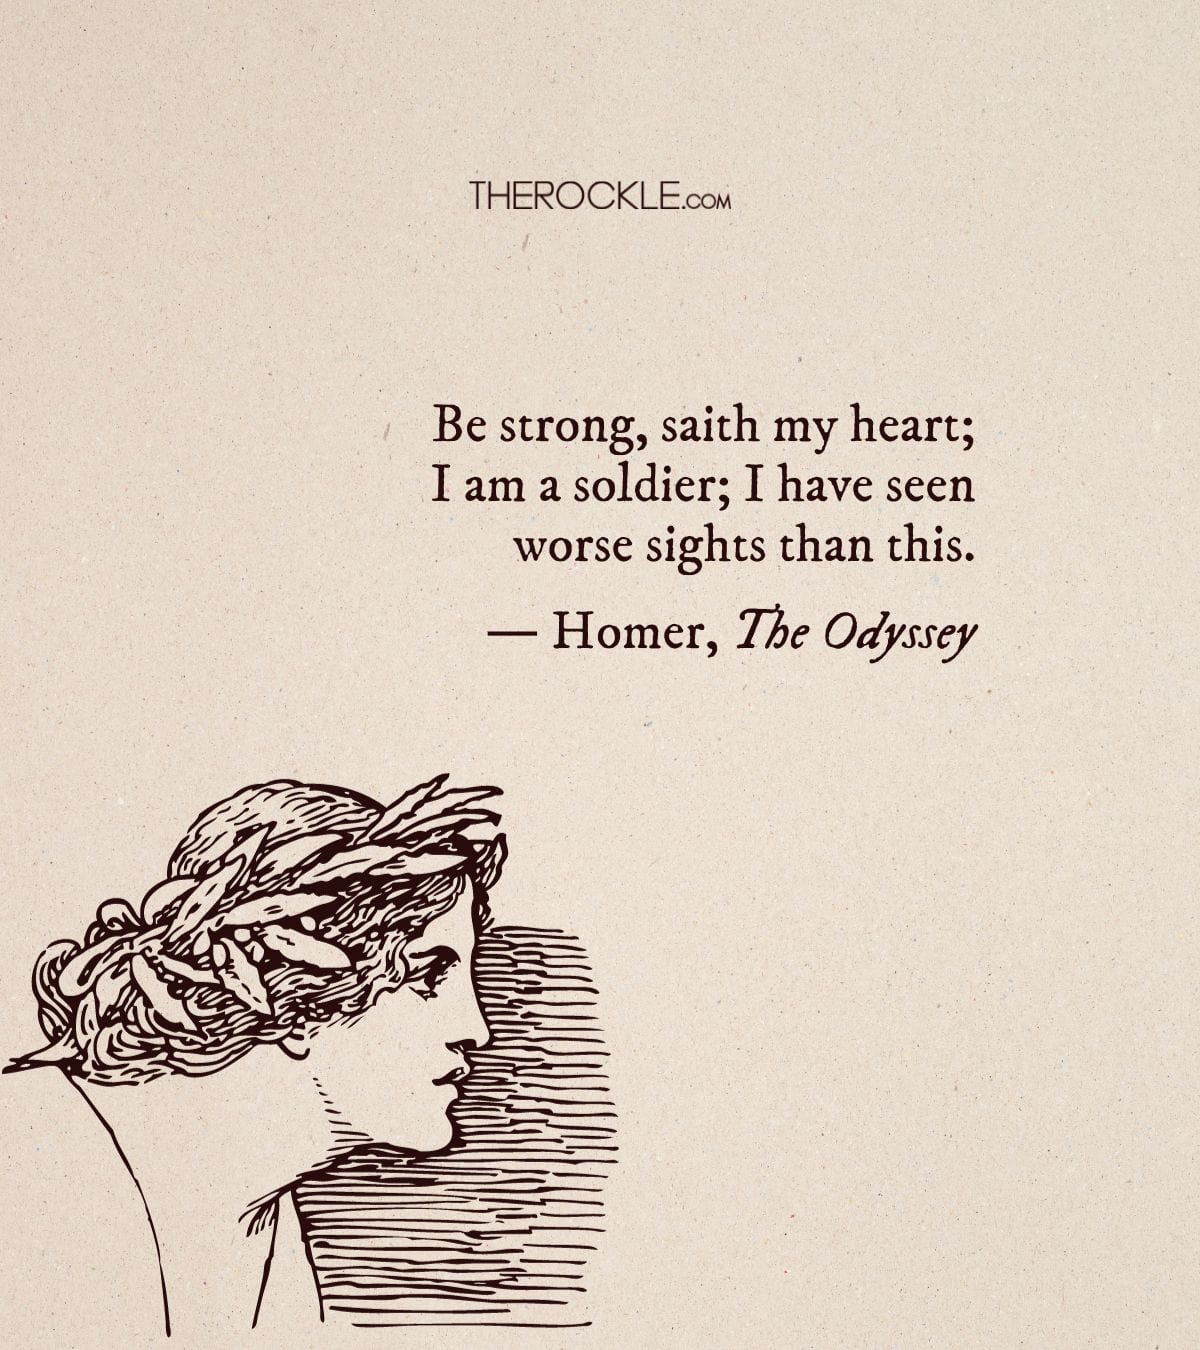 Homer's quote about inner strength from The Odyssey